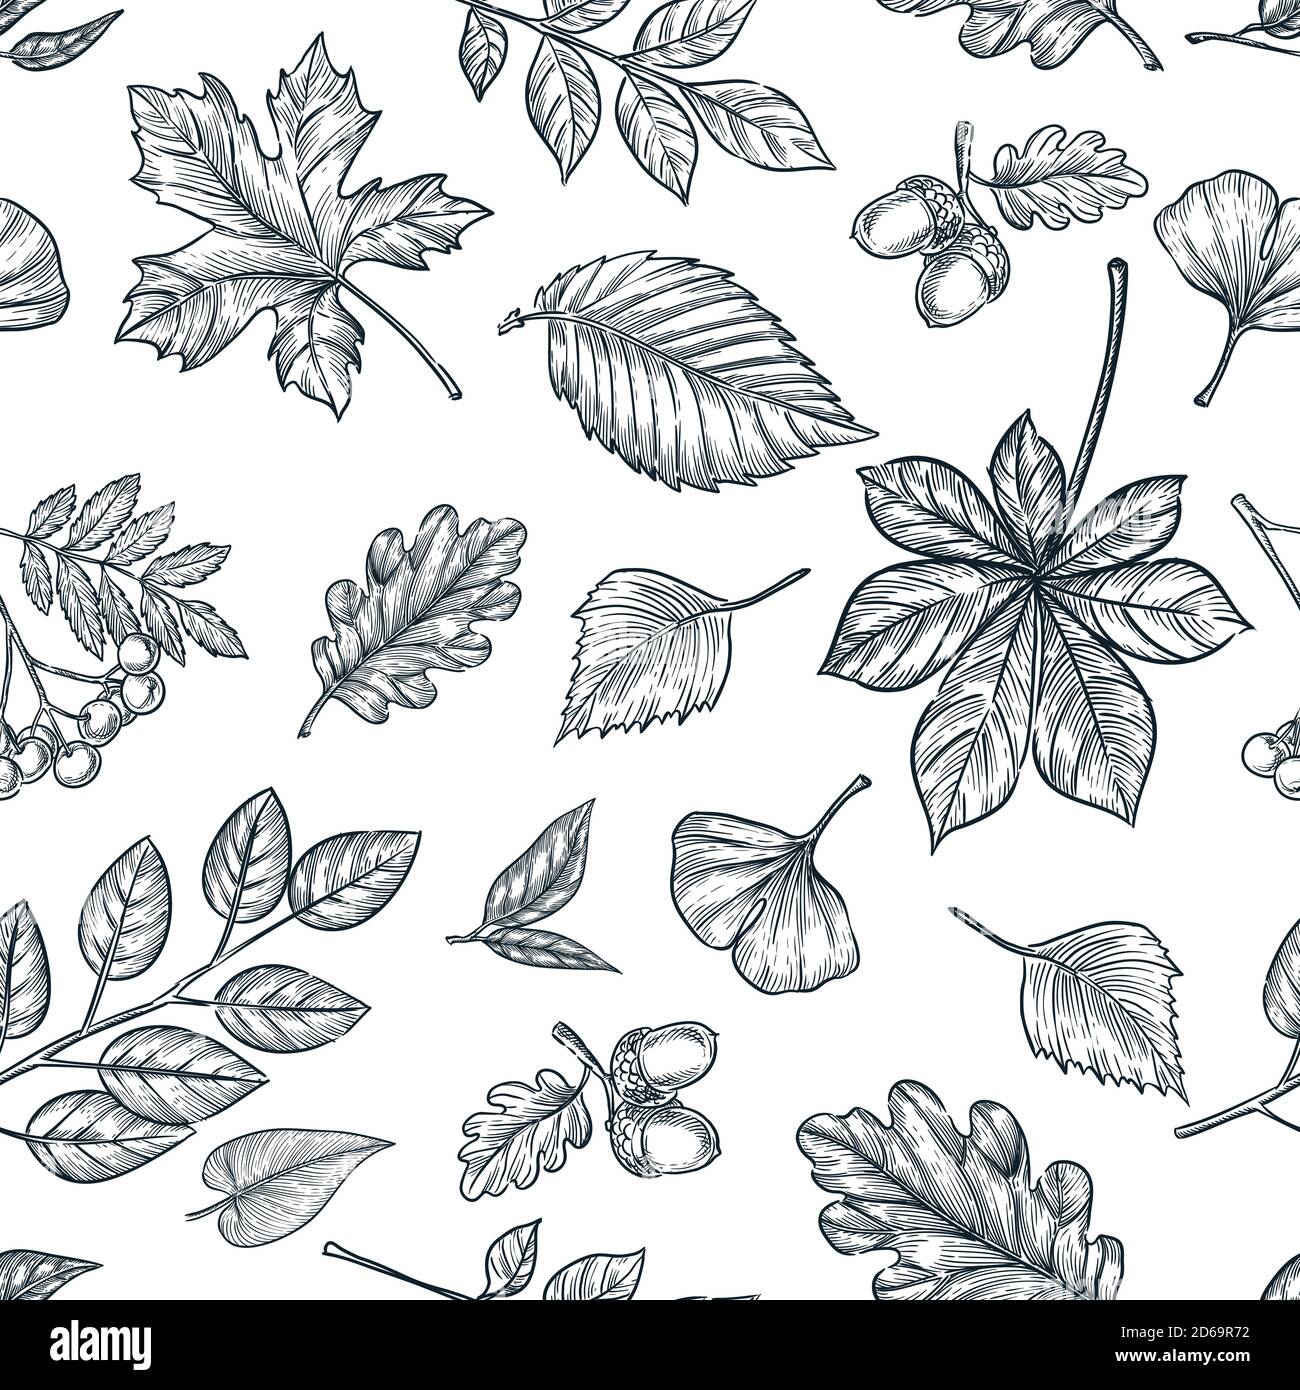 Autumn black white outline leaves seamless pattern. Vector hand drawn sketch illustration of forest plants. Fall nature background design. Trendy fash Stock Vector